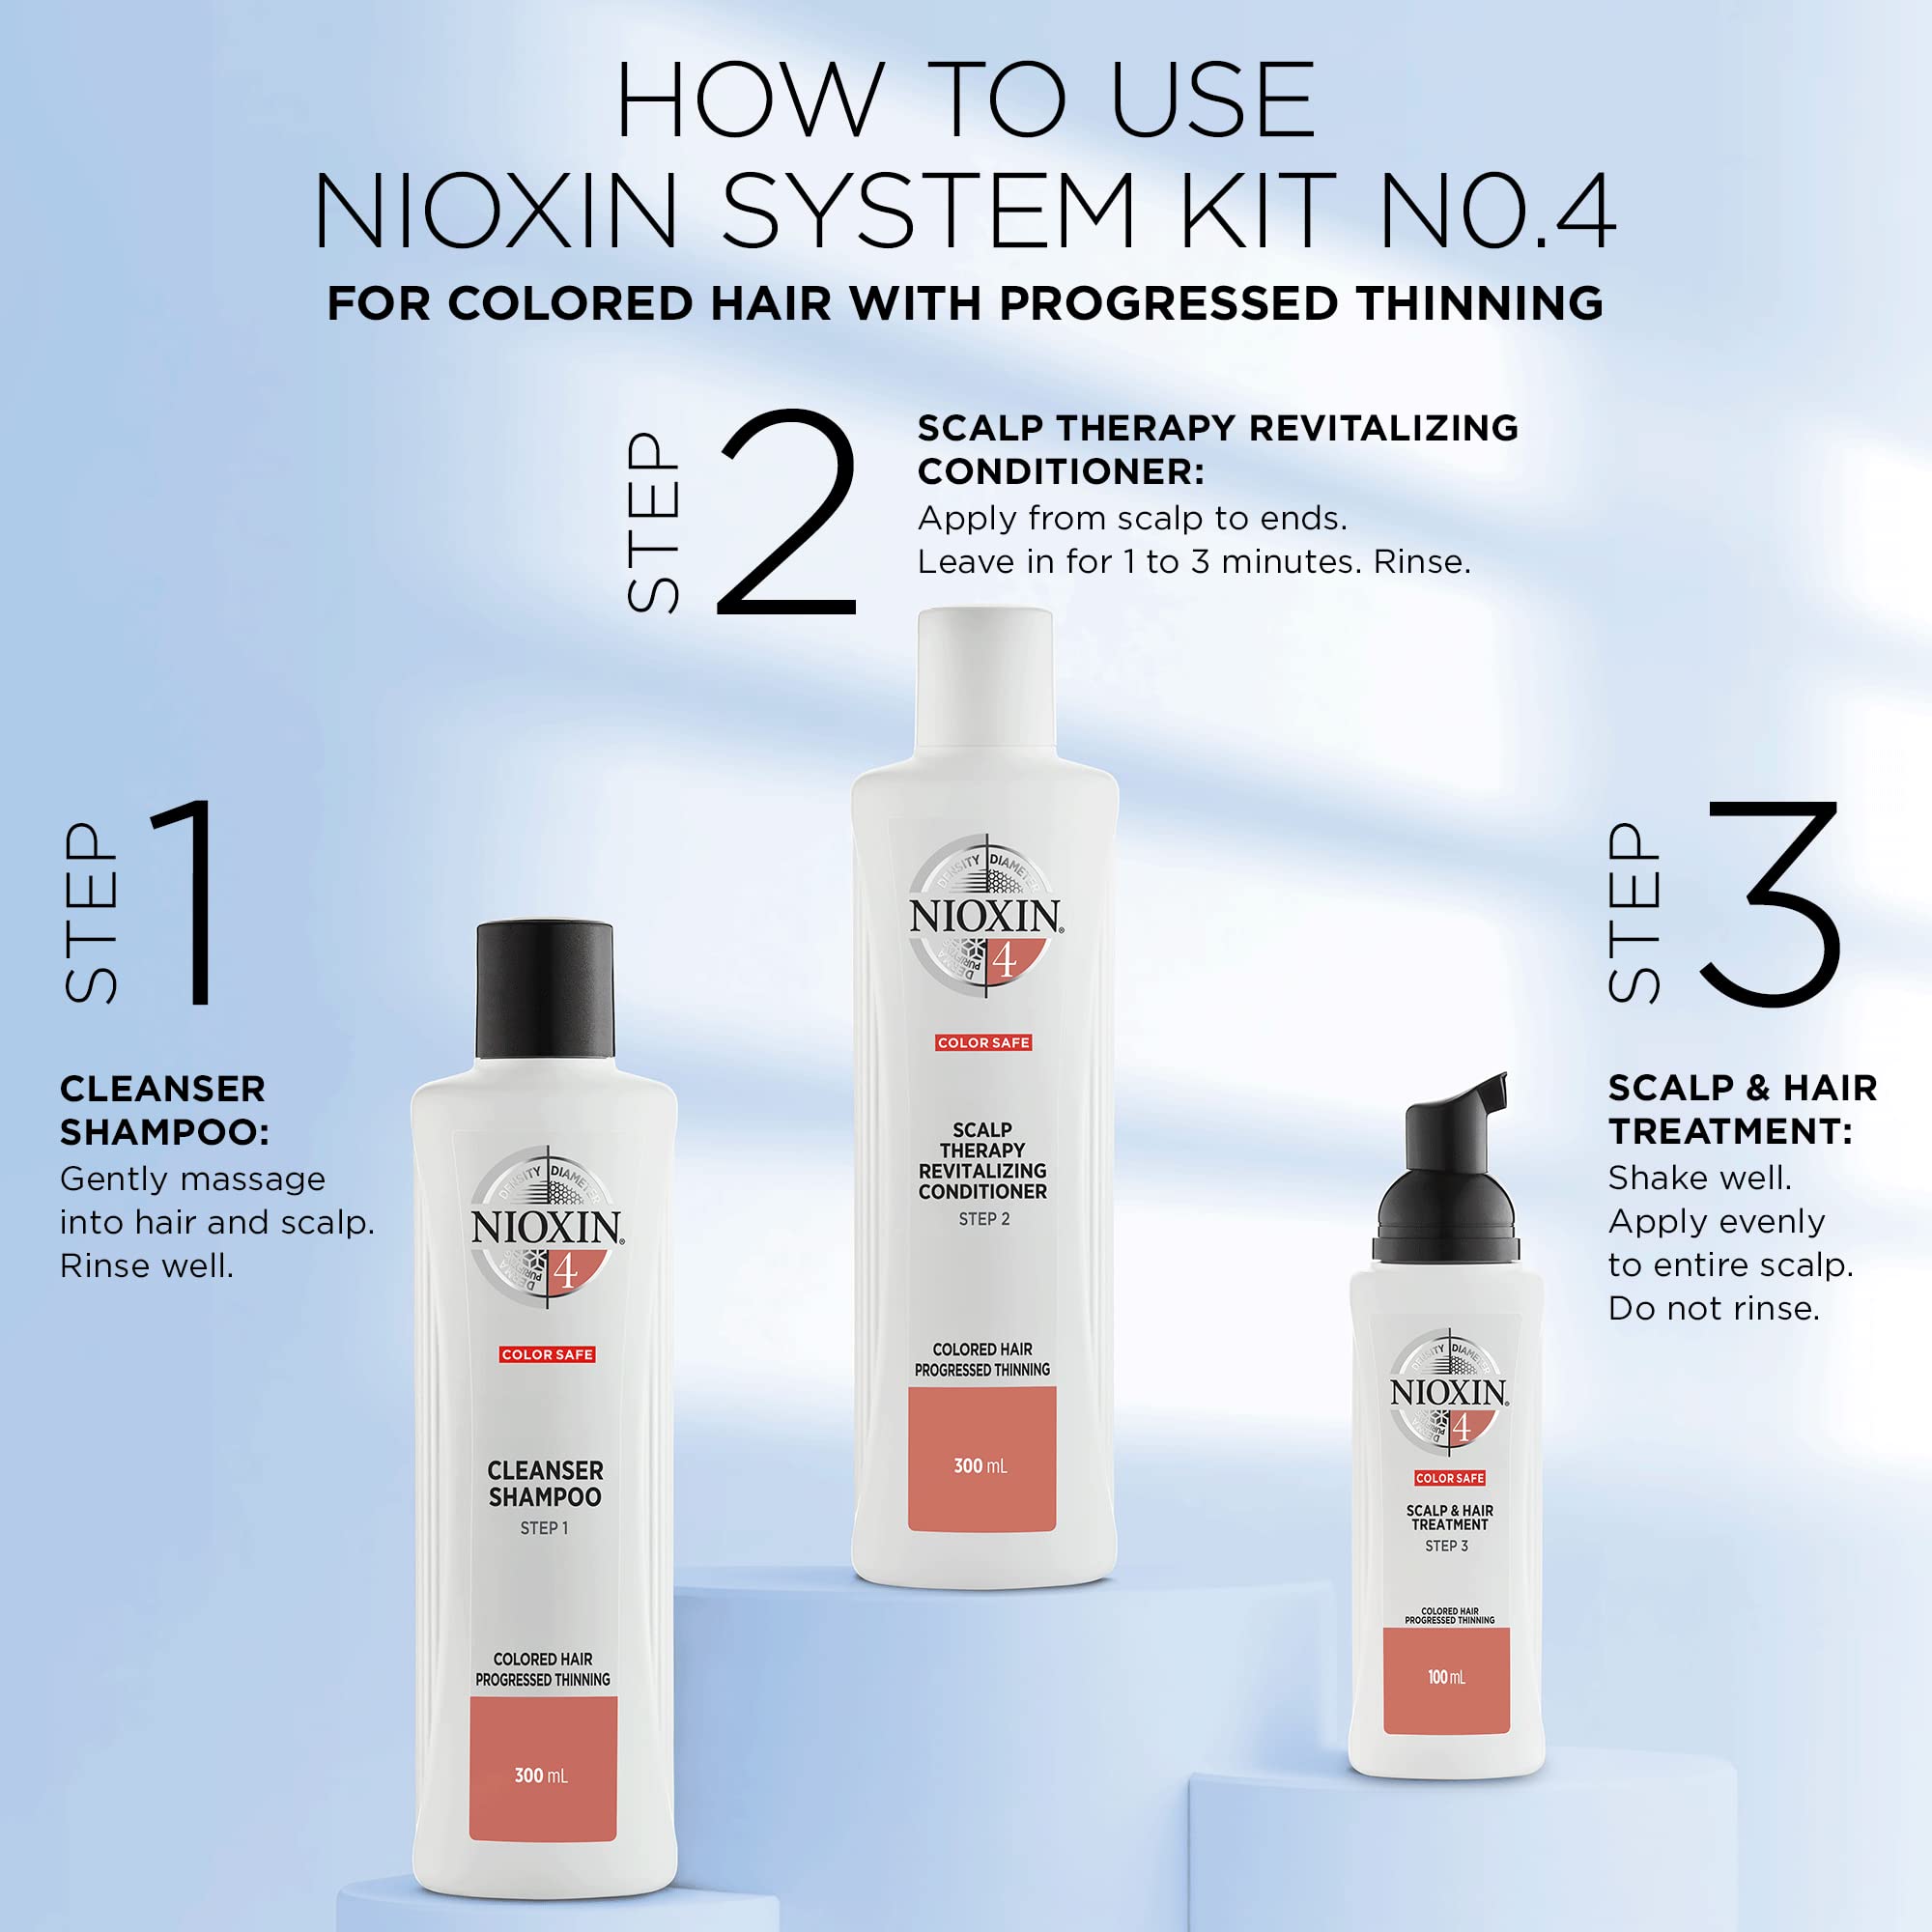 Nioxin System 4 Scalp & Hair Leave-In Treatment, Restore Hair Fullness, Prevent & Relieve Dry Scalp Symptoms, For Color Treated Hair with Progressed Thinning, 6.8 oz